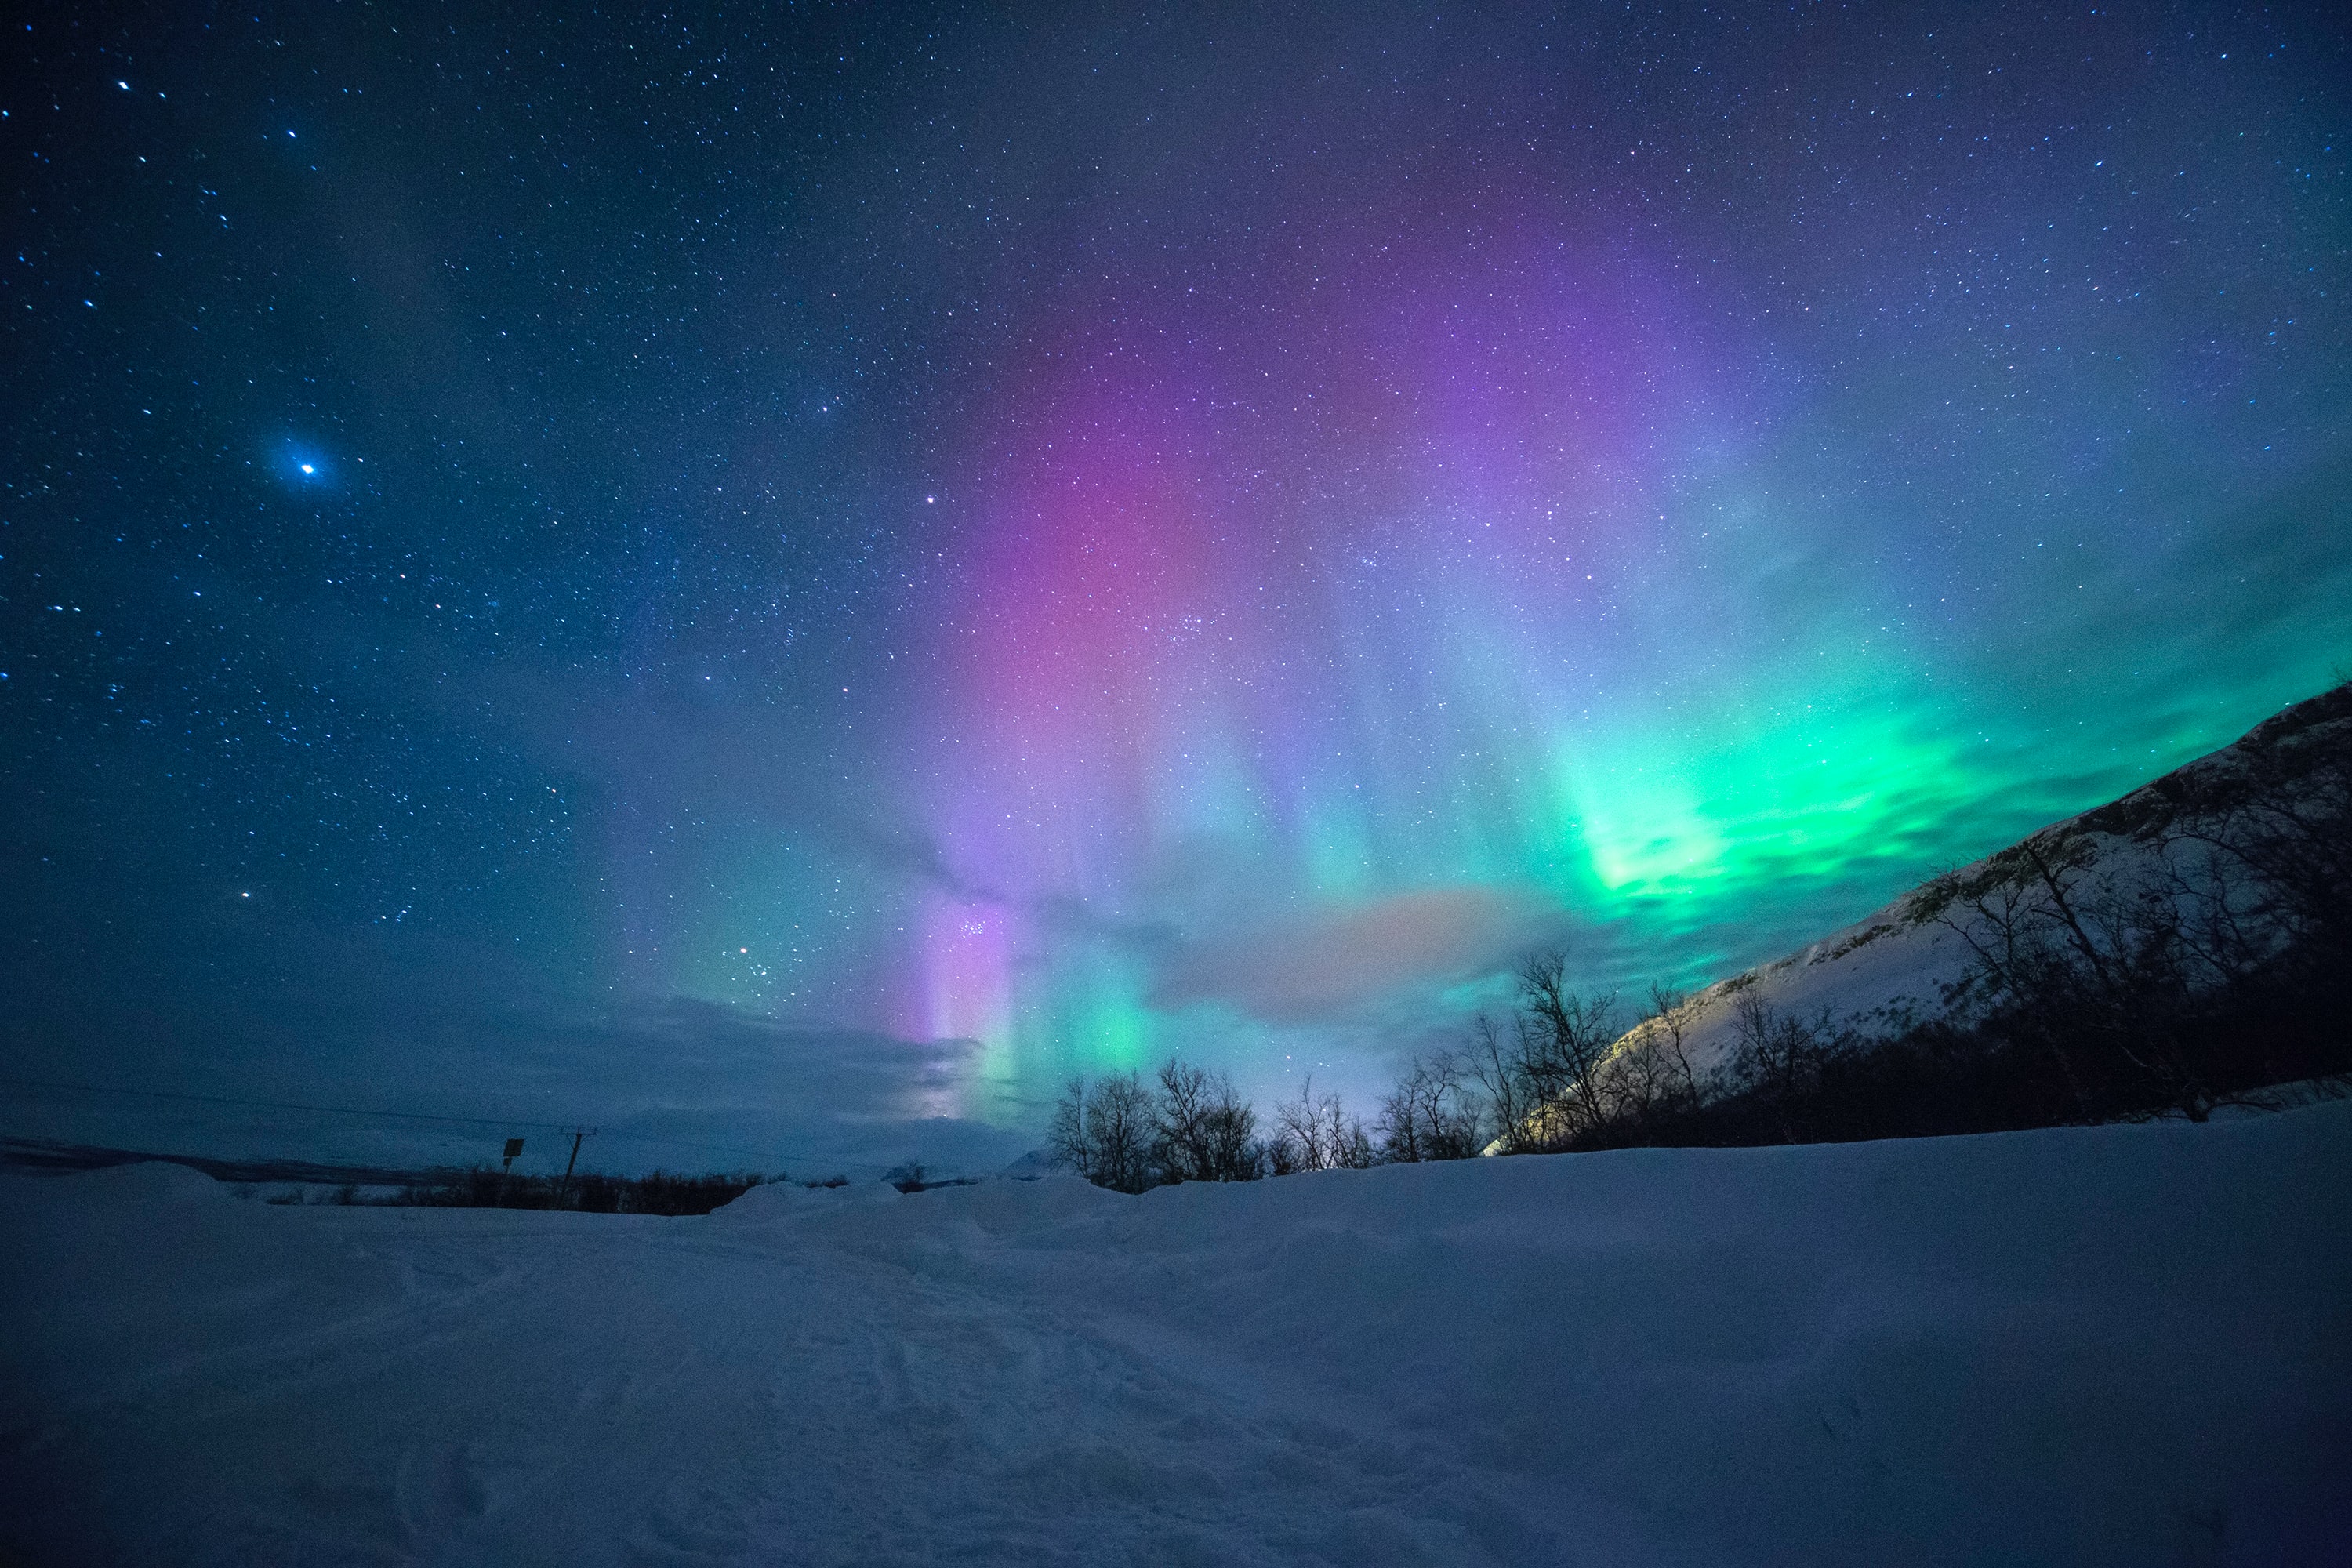 Best Time To See The Northern Lights